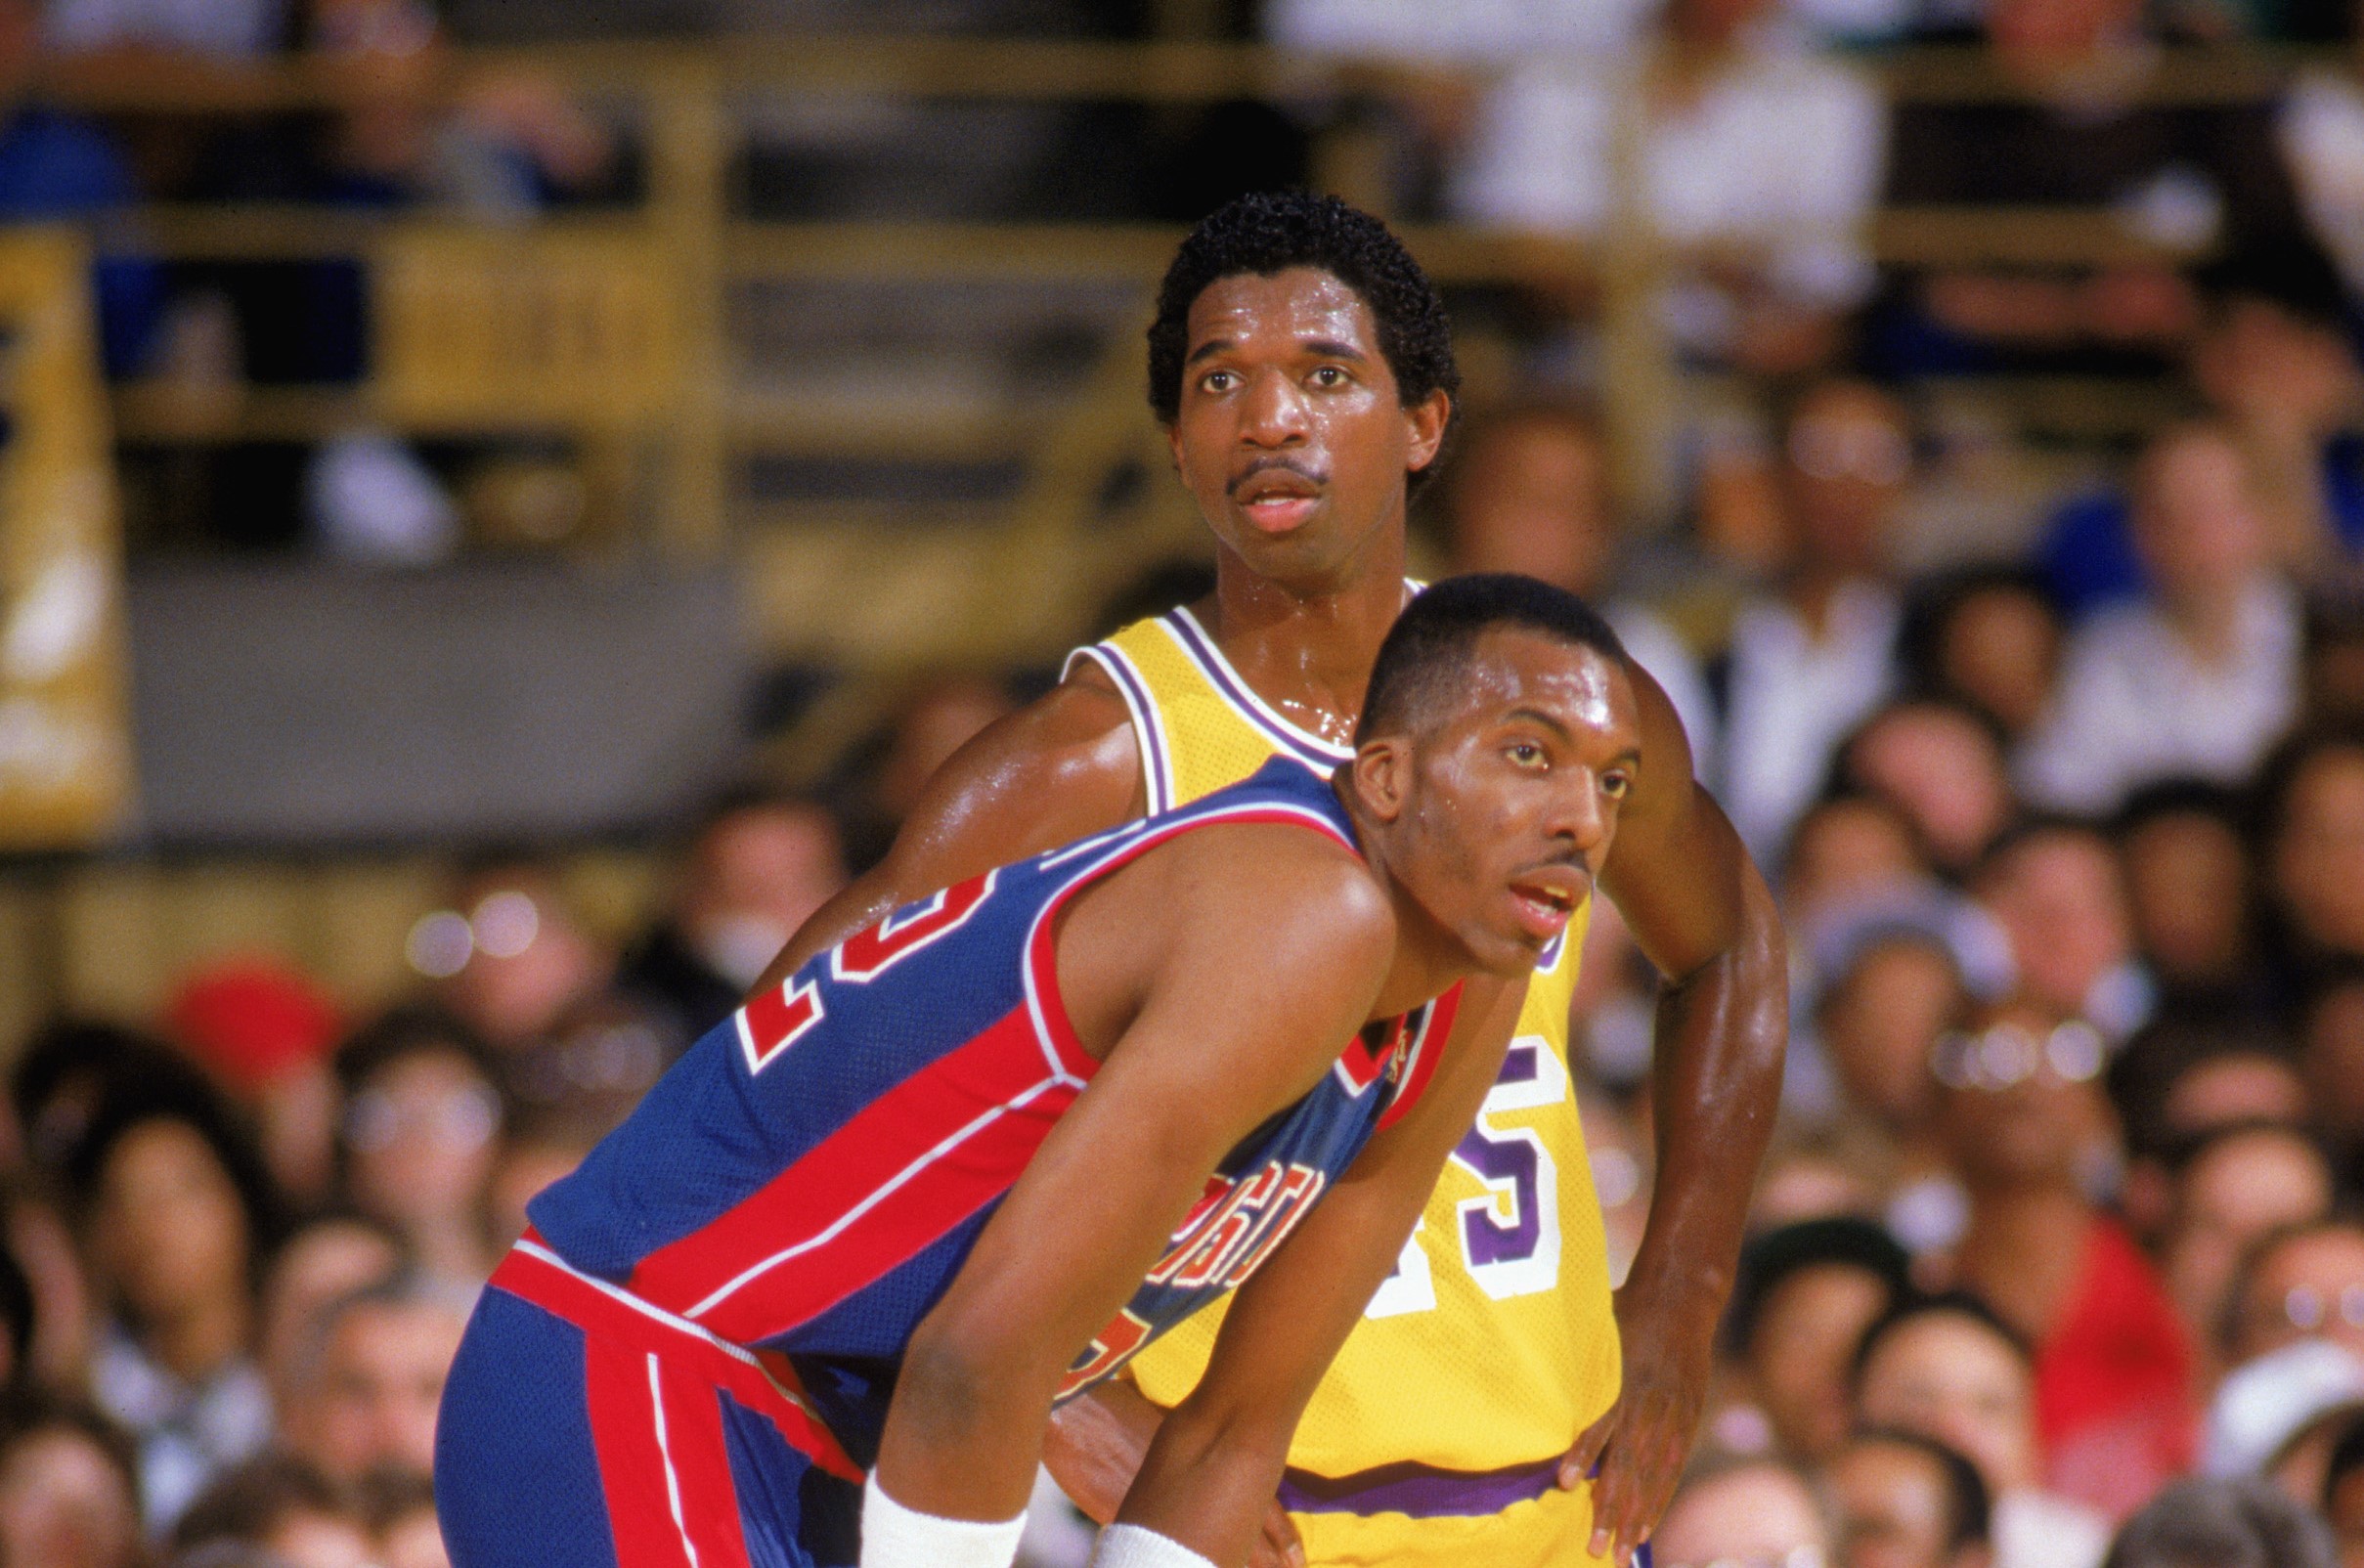 John Salley of the Detroit Pistons and A.C. Green of the Los Angeles Lakers wait for the free throw.